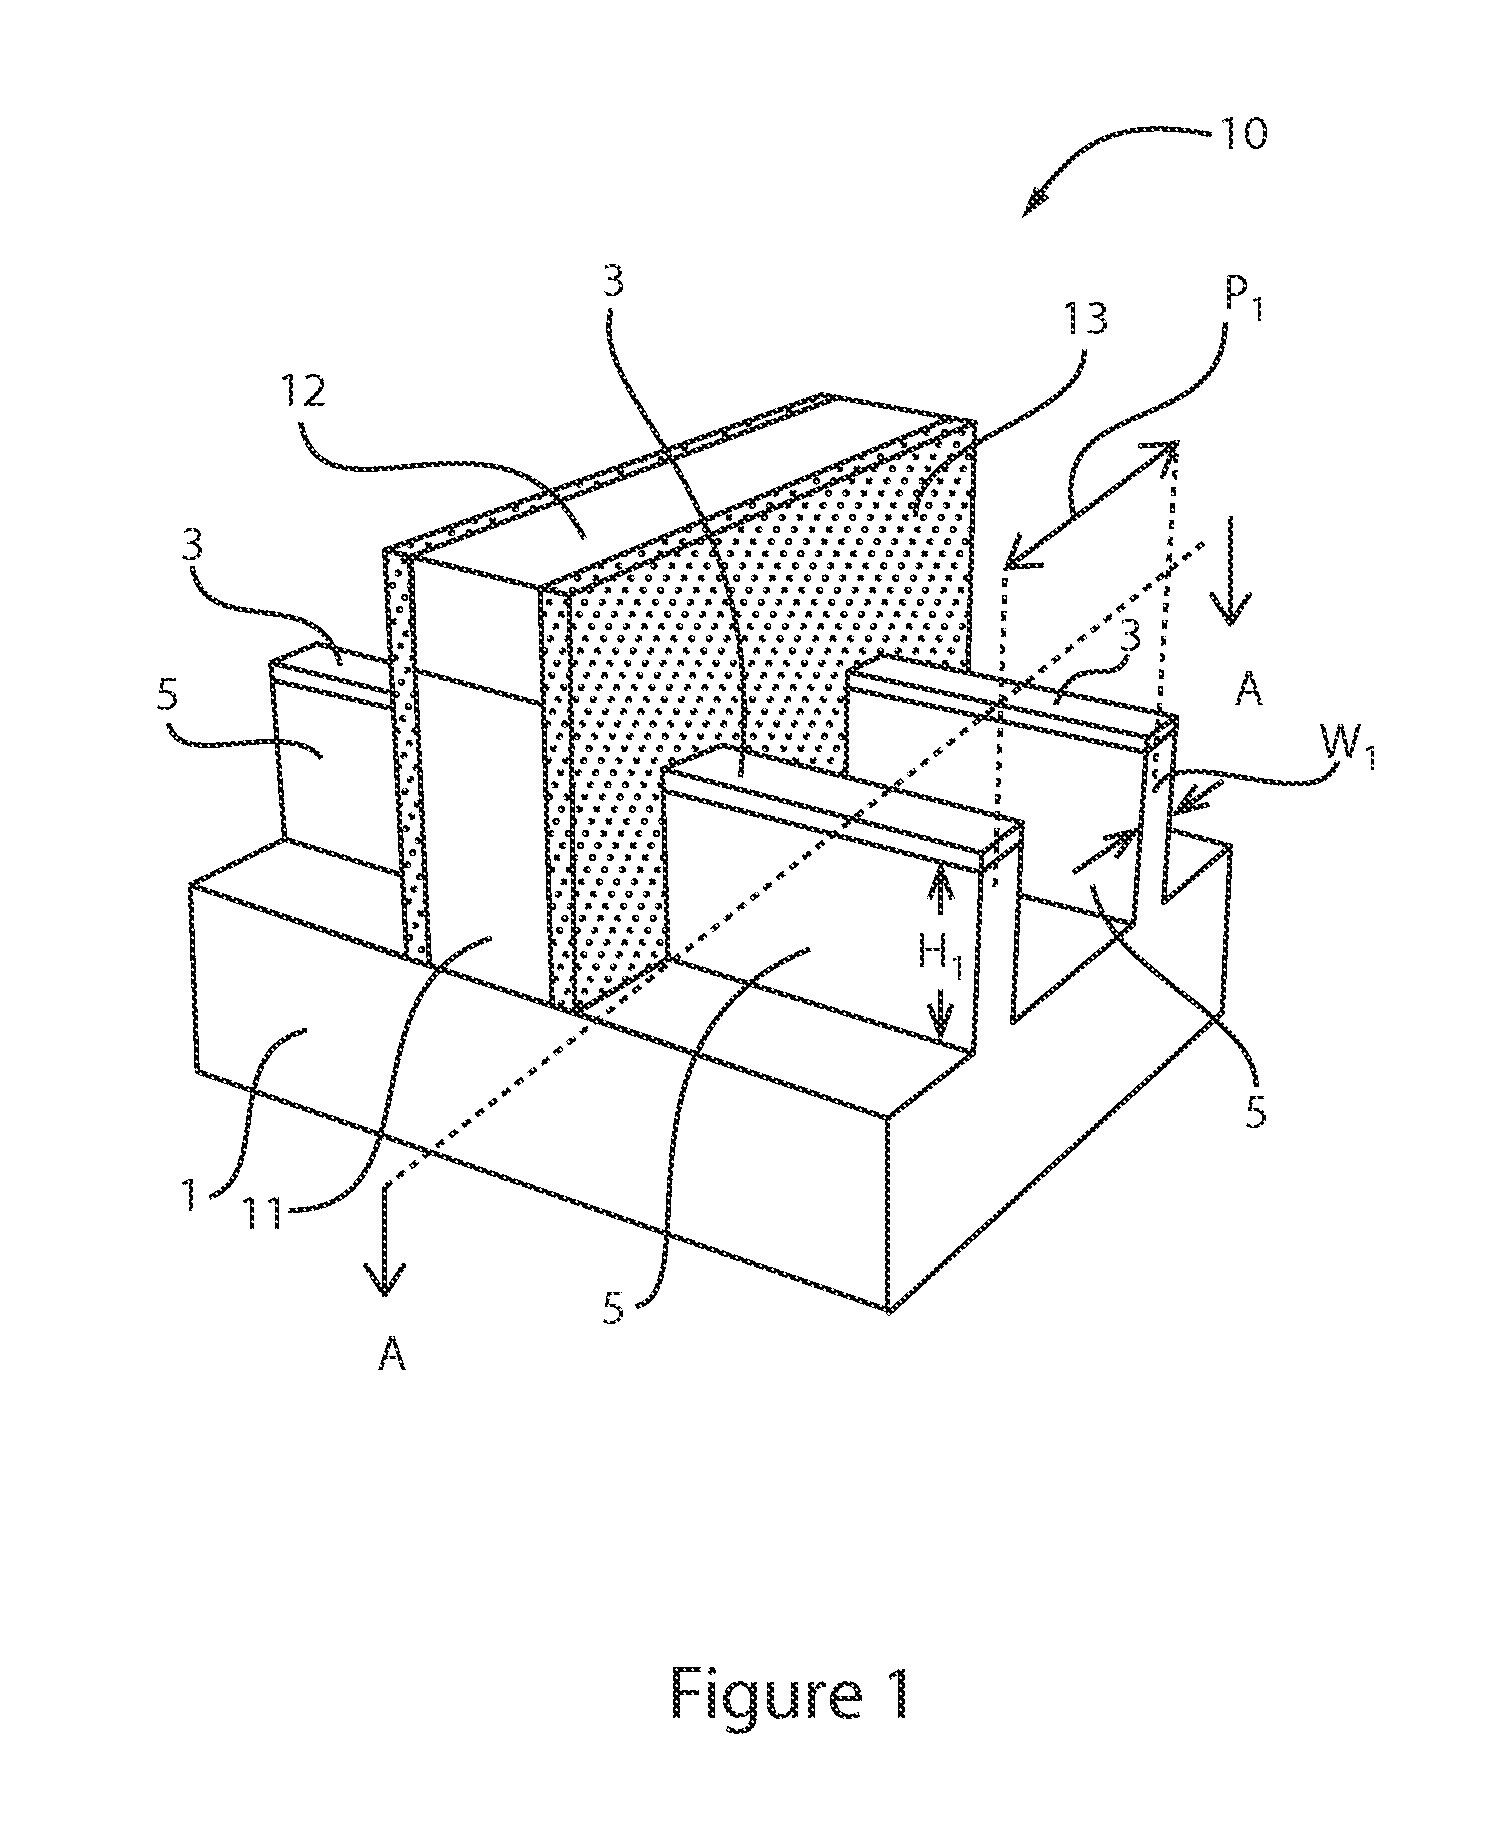 Epitaxial buffer layer for finfet source and drain junction leakage reduction